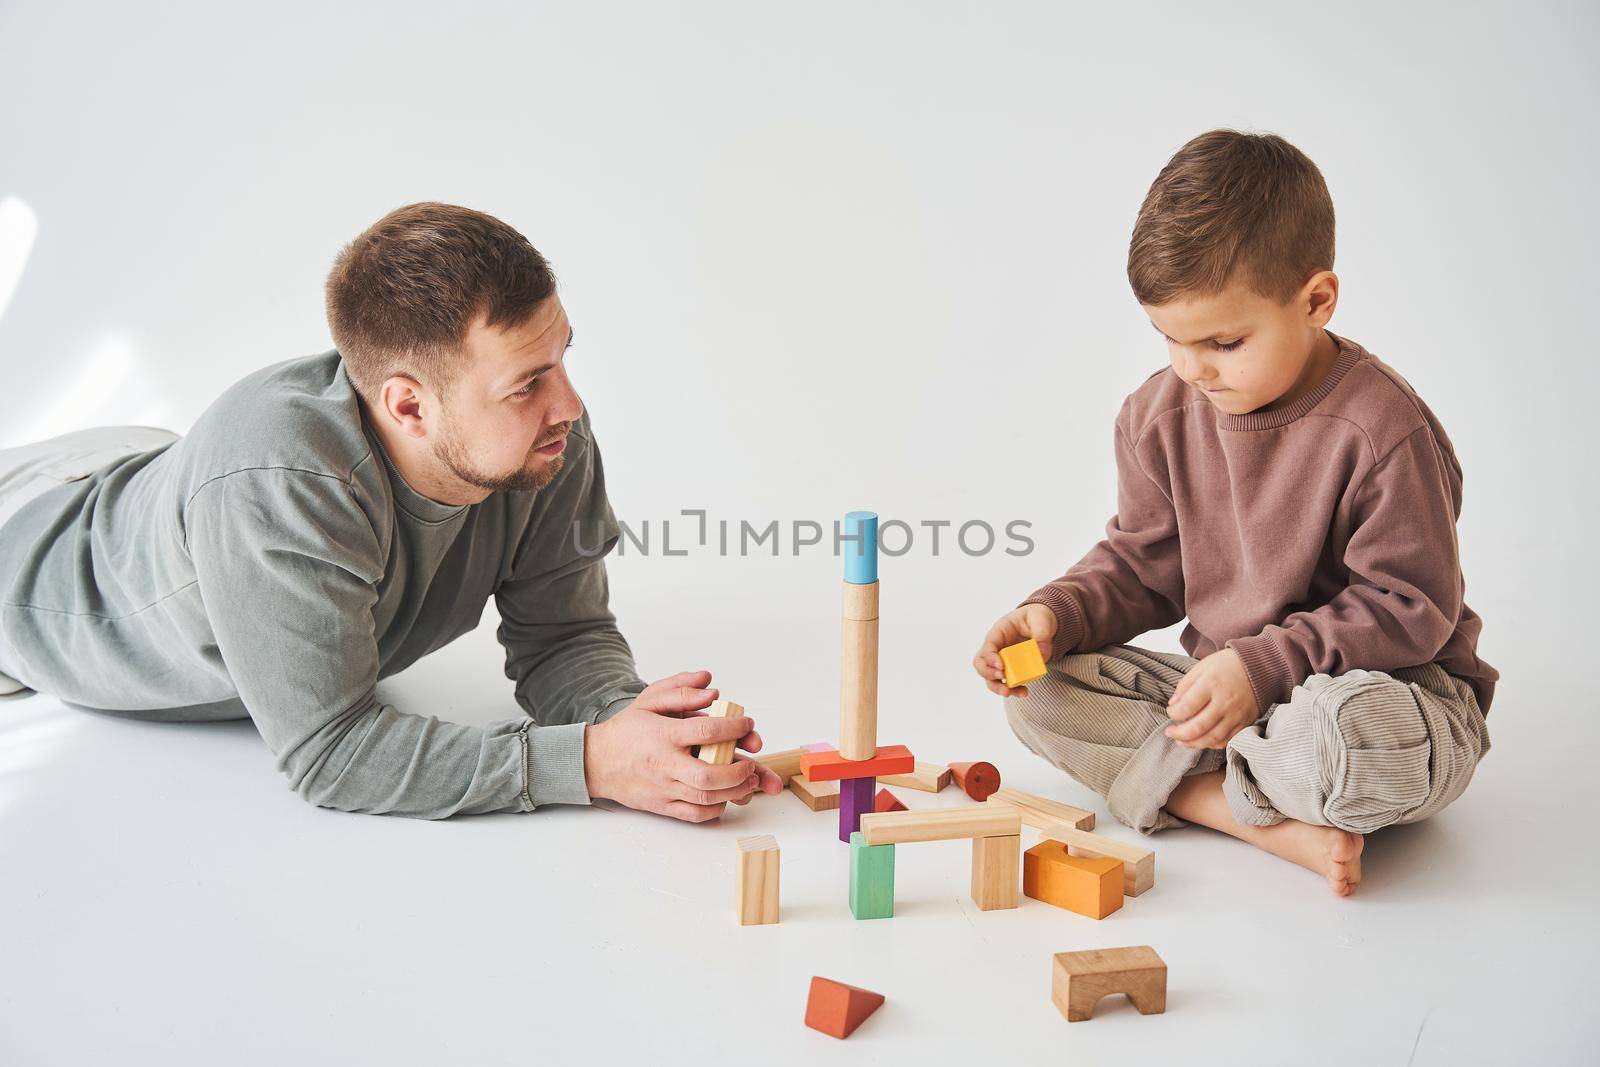 Caring dad plays with cheerful son with toy wooden cubes on white background. Fatherhood and child care